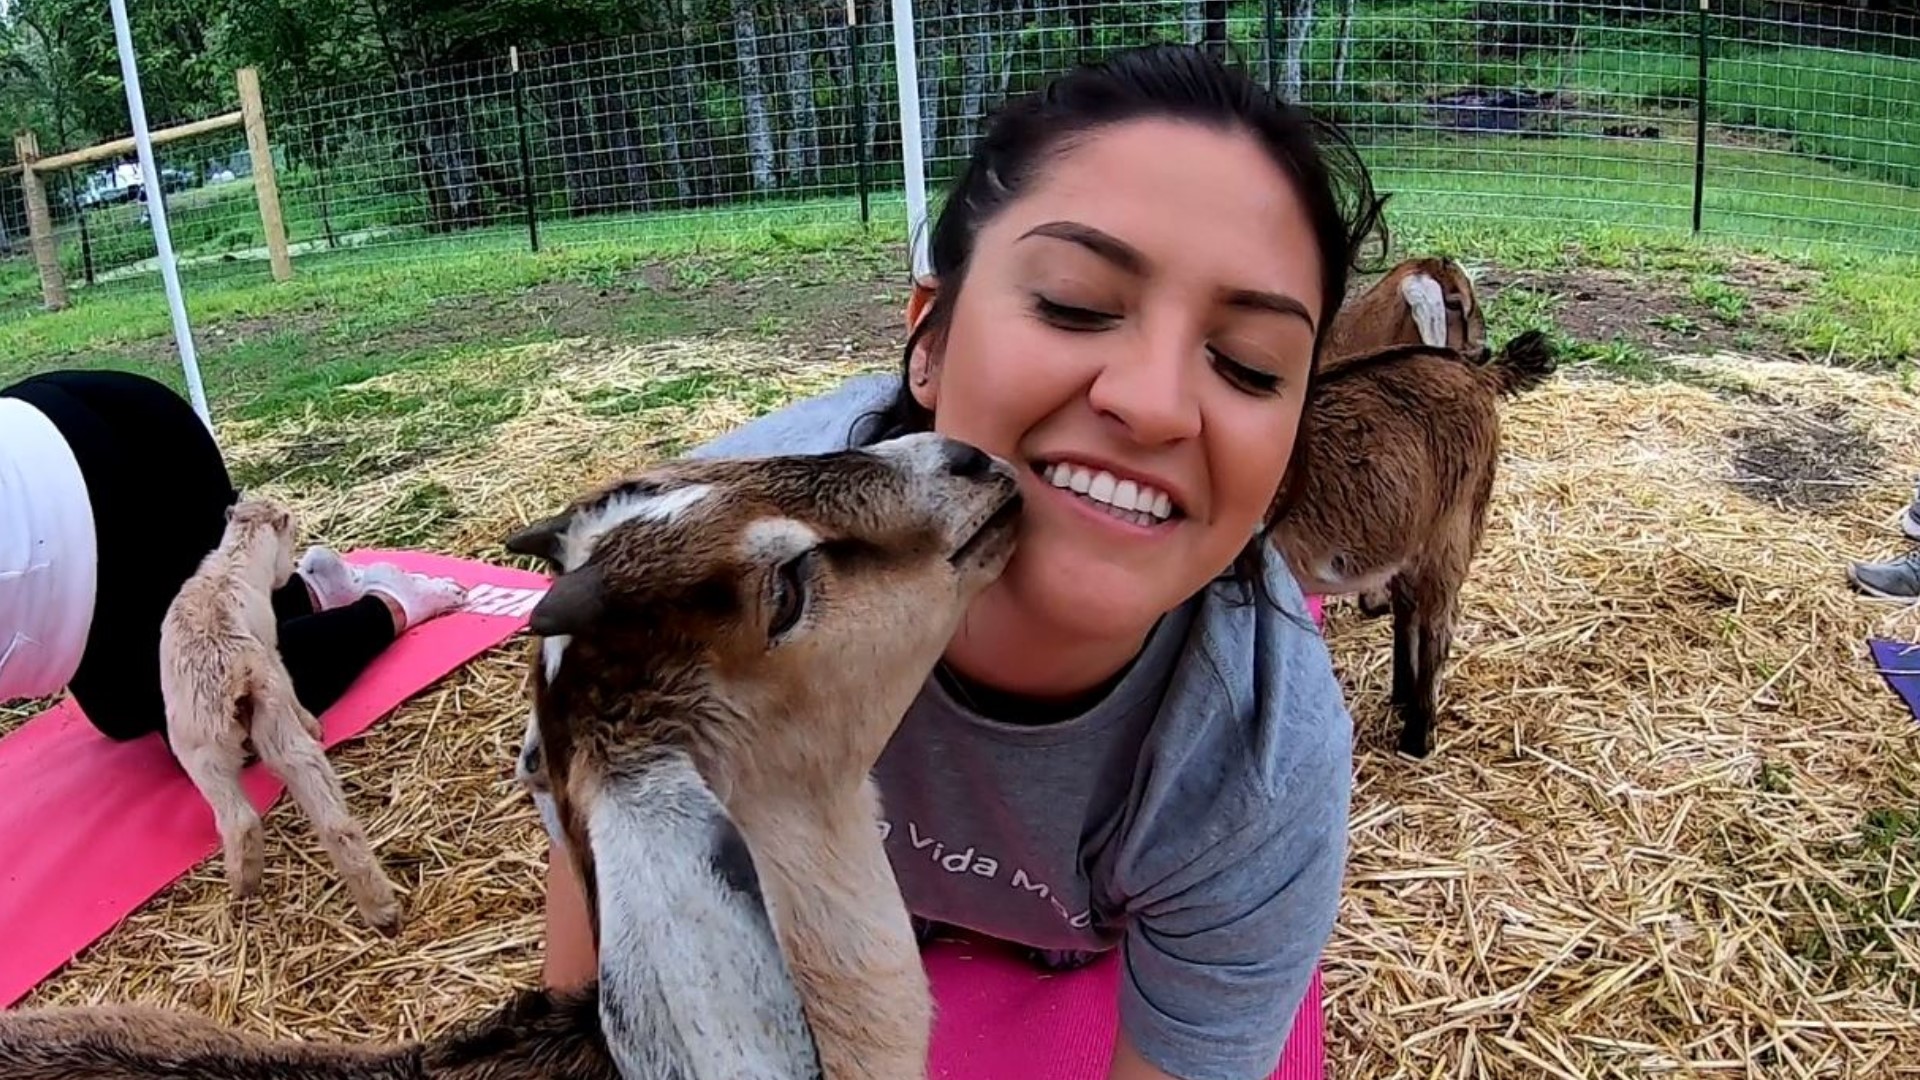 Stone City Farm was best known for its goat milk soap... until they introduced goat yoga to the community.